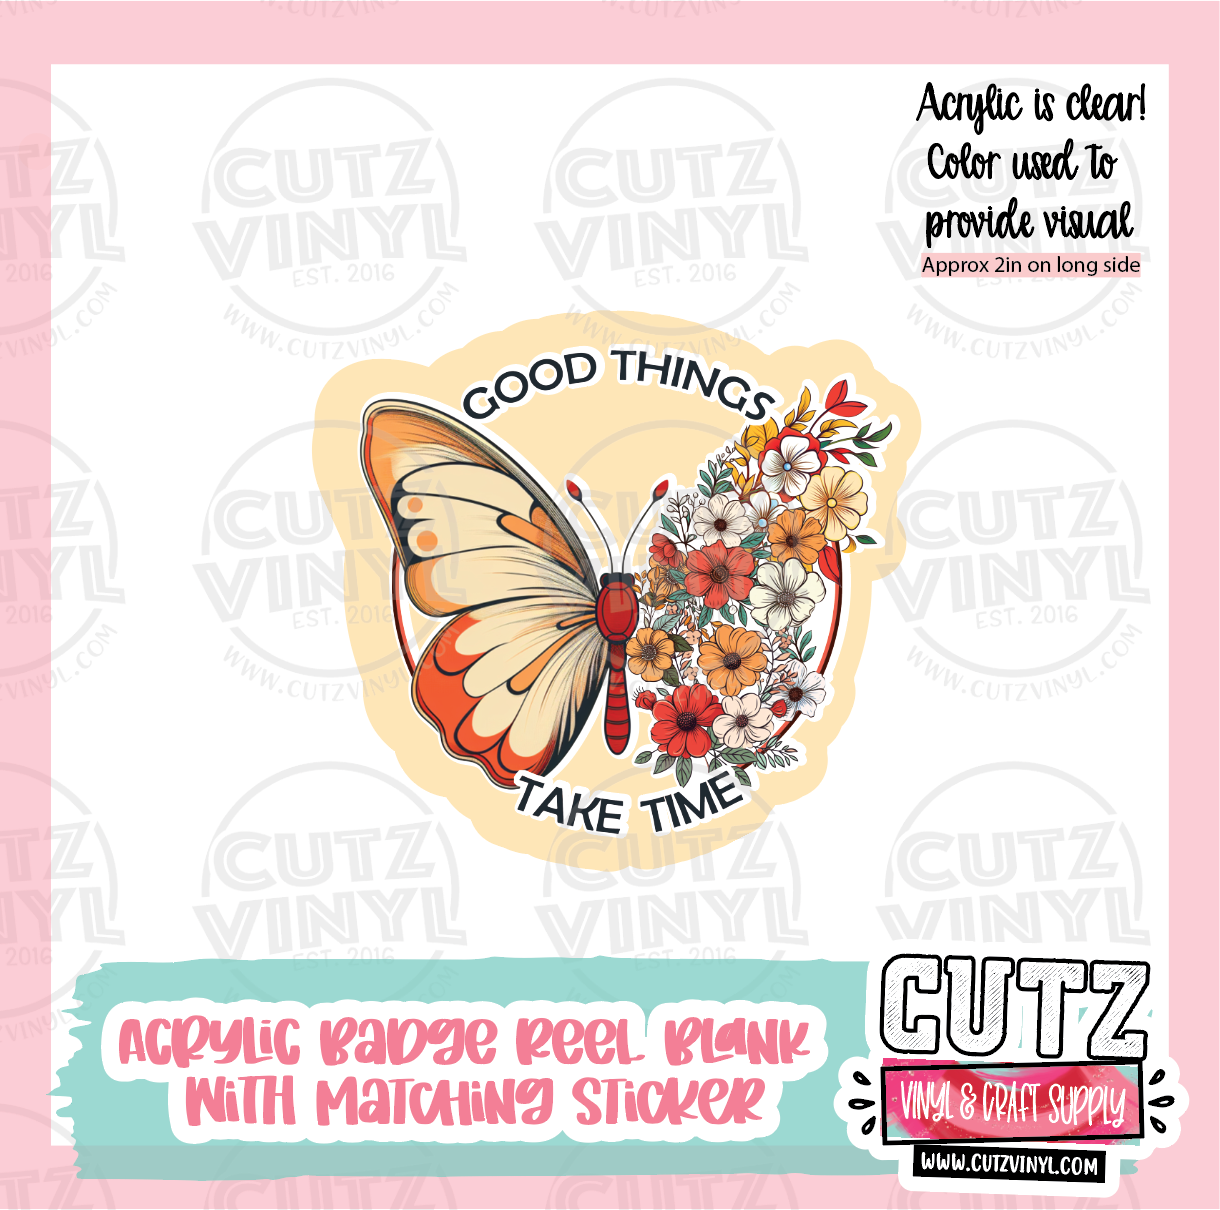 Good Things Take Time - Acrylic Badge Reel Blank and Matching